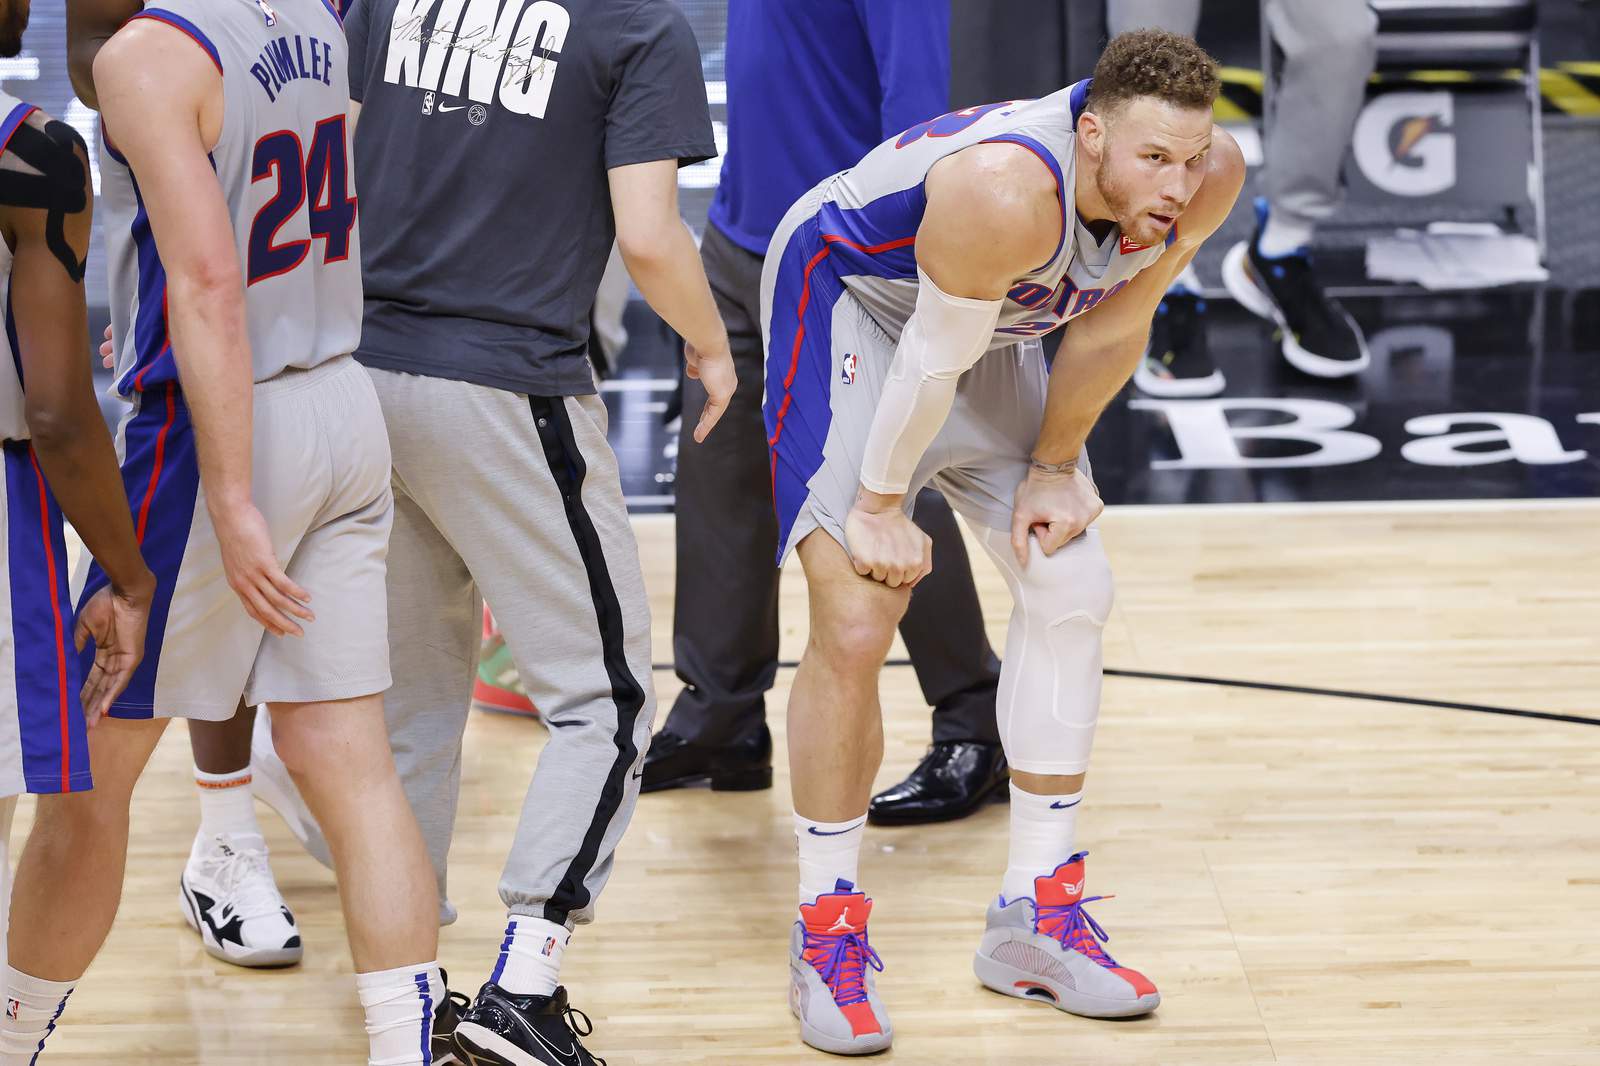 Why the Pistons are losing: A look at the numbers